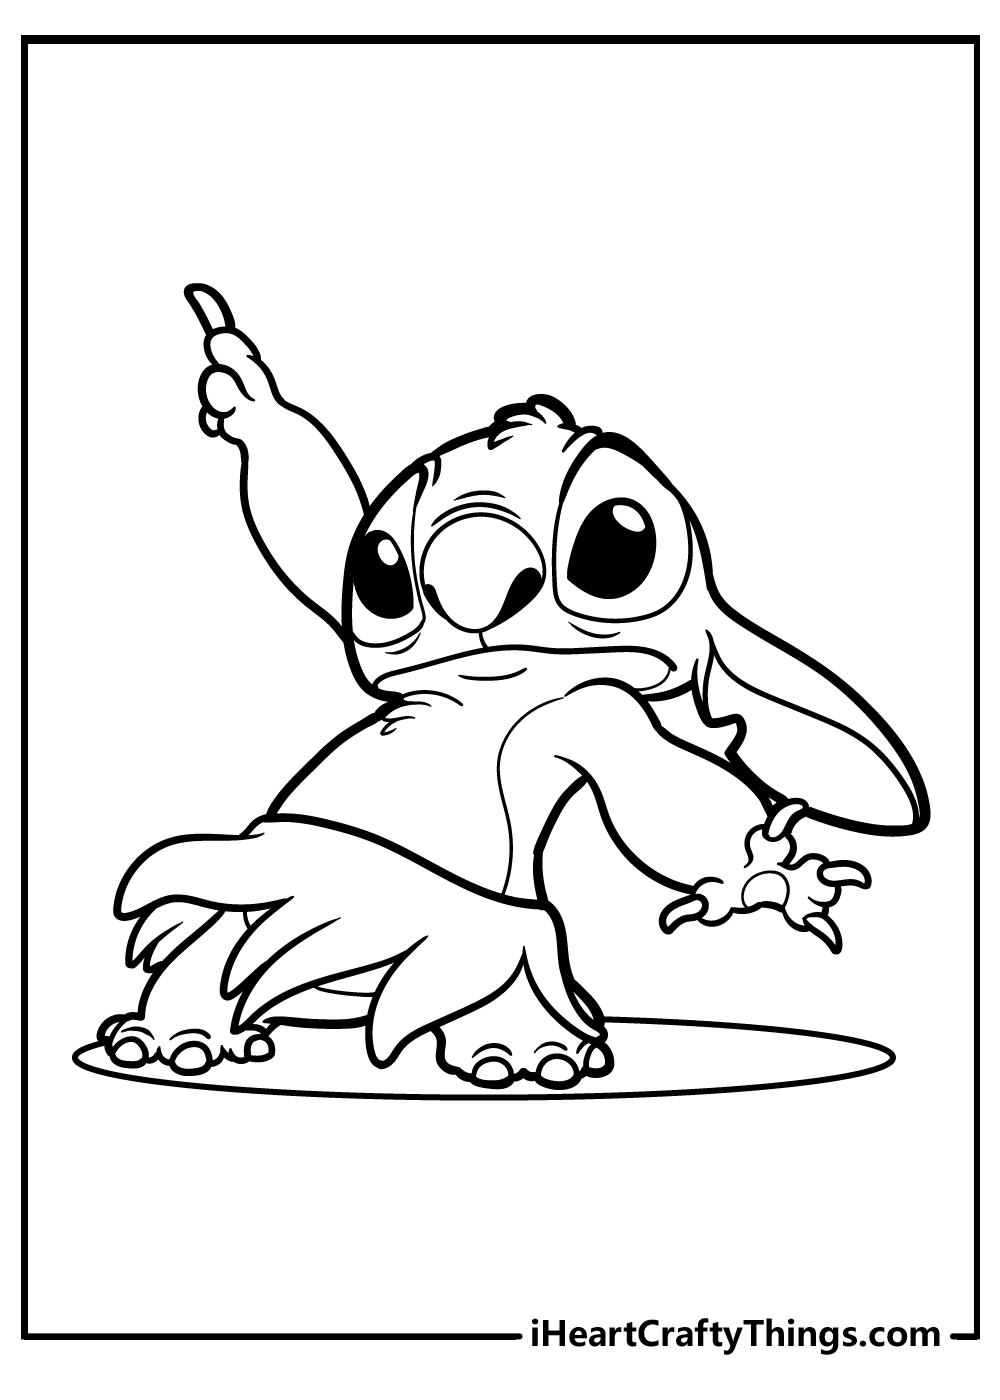 Lilo & Stitch Coloring Pages Updated 21